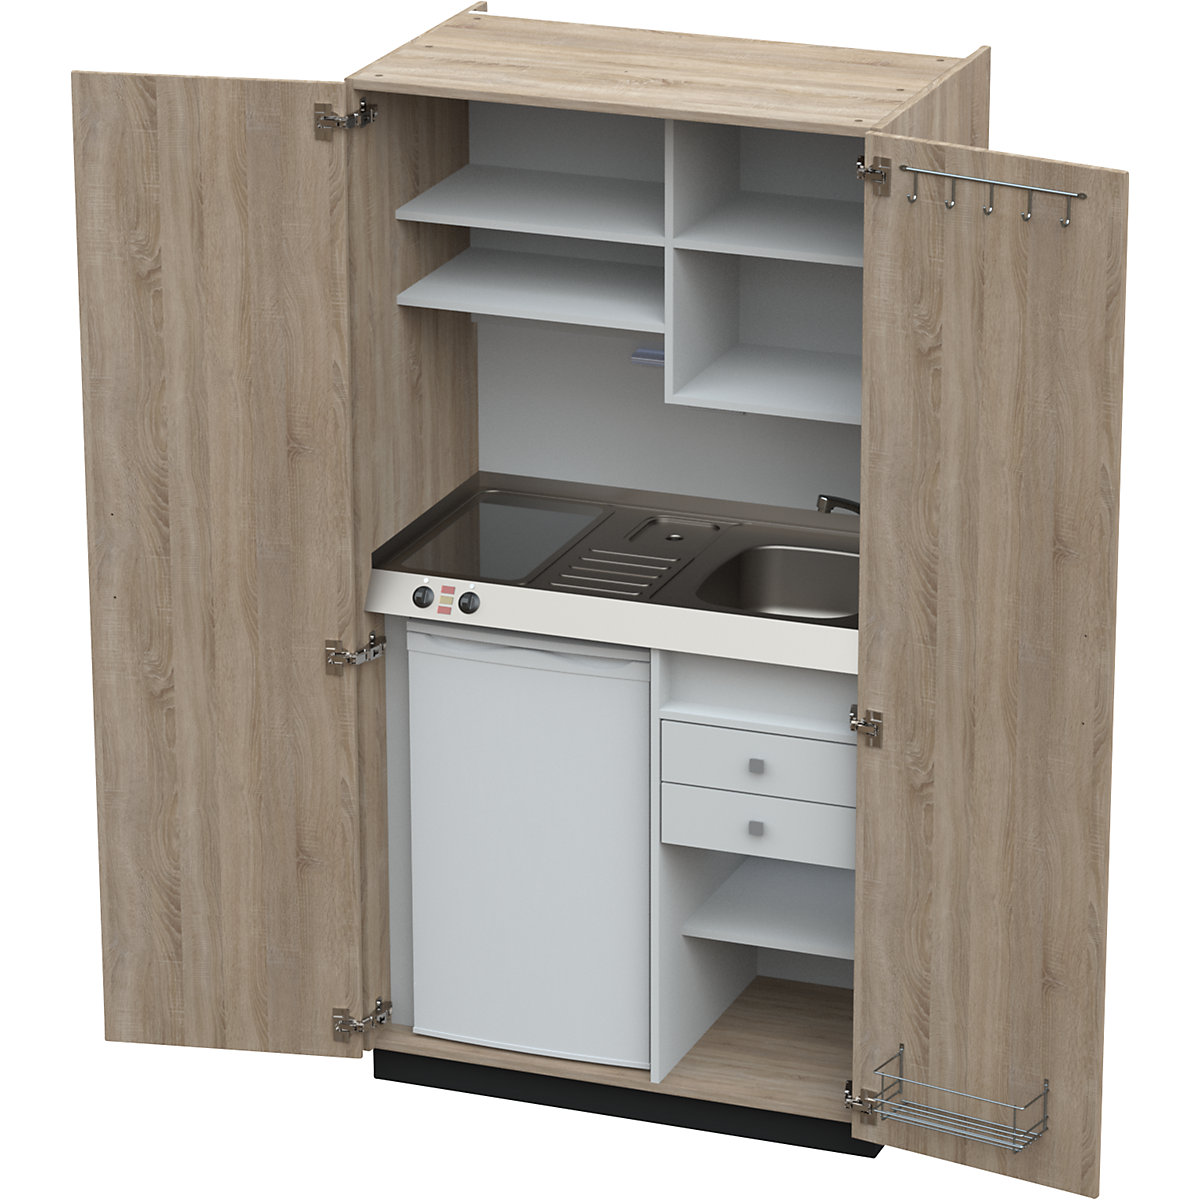 Kitchen unit with hinged doors, 2 glass ceramic hotplates, basin at right, oak, 1956 x 1000 x 650 mm-12